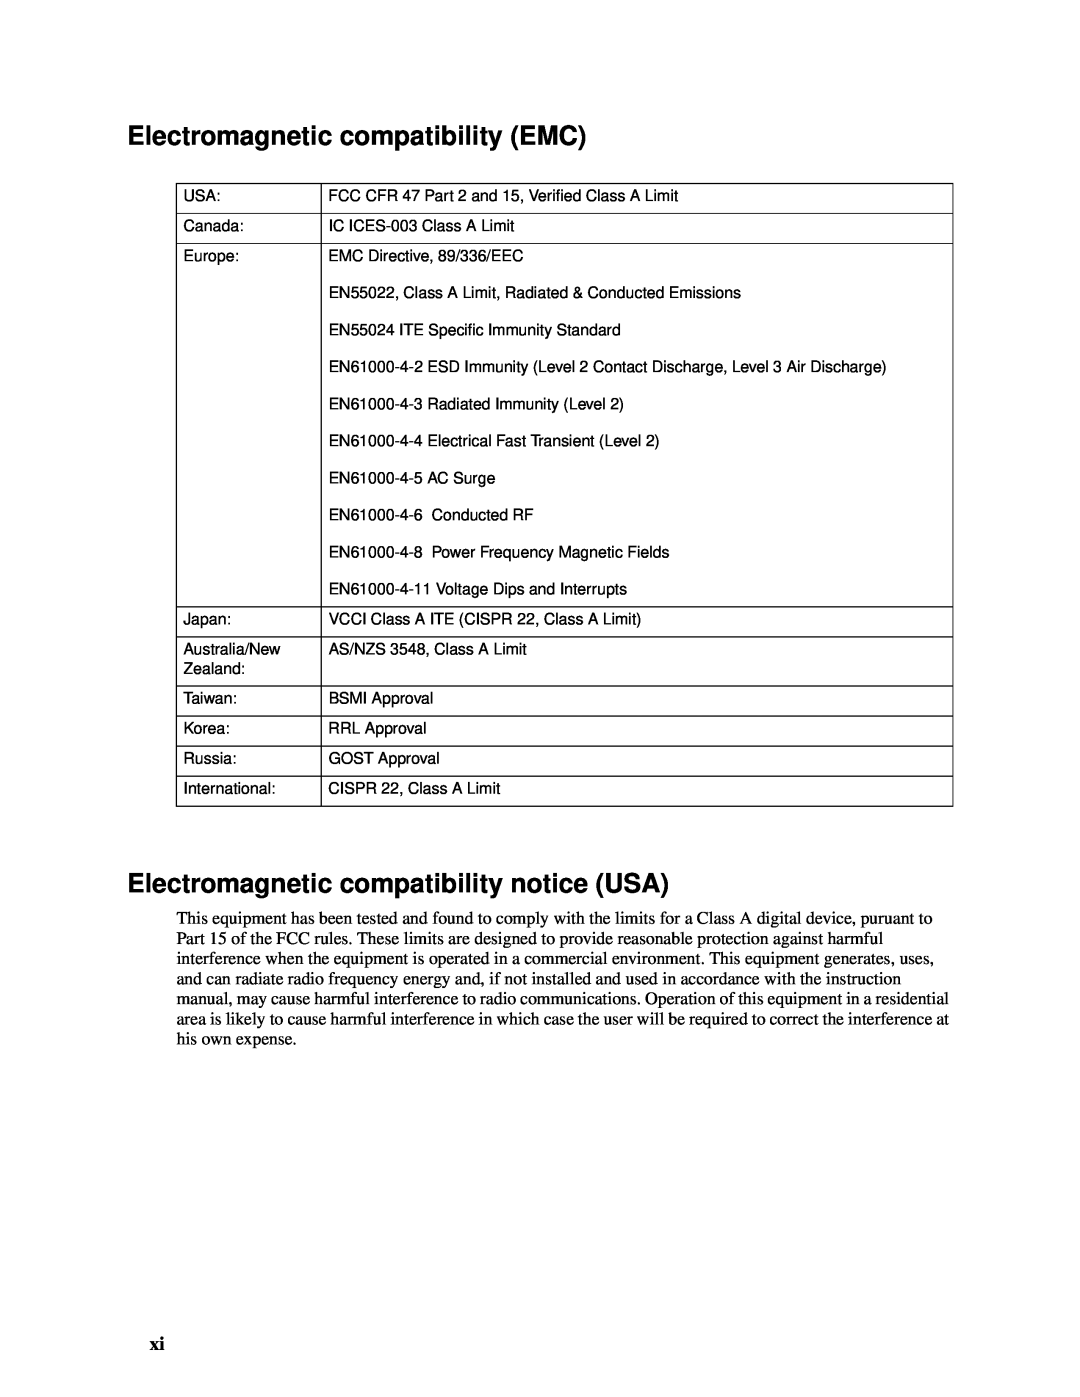 Intel SBCEFCSW manual Electromagnetic compatibility EMC, Electromagnetic compatibility notice USA 